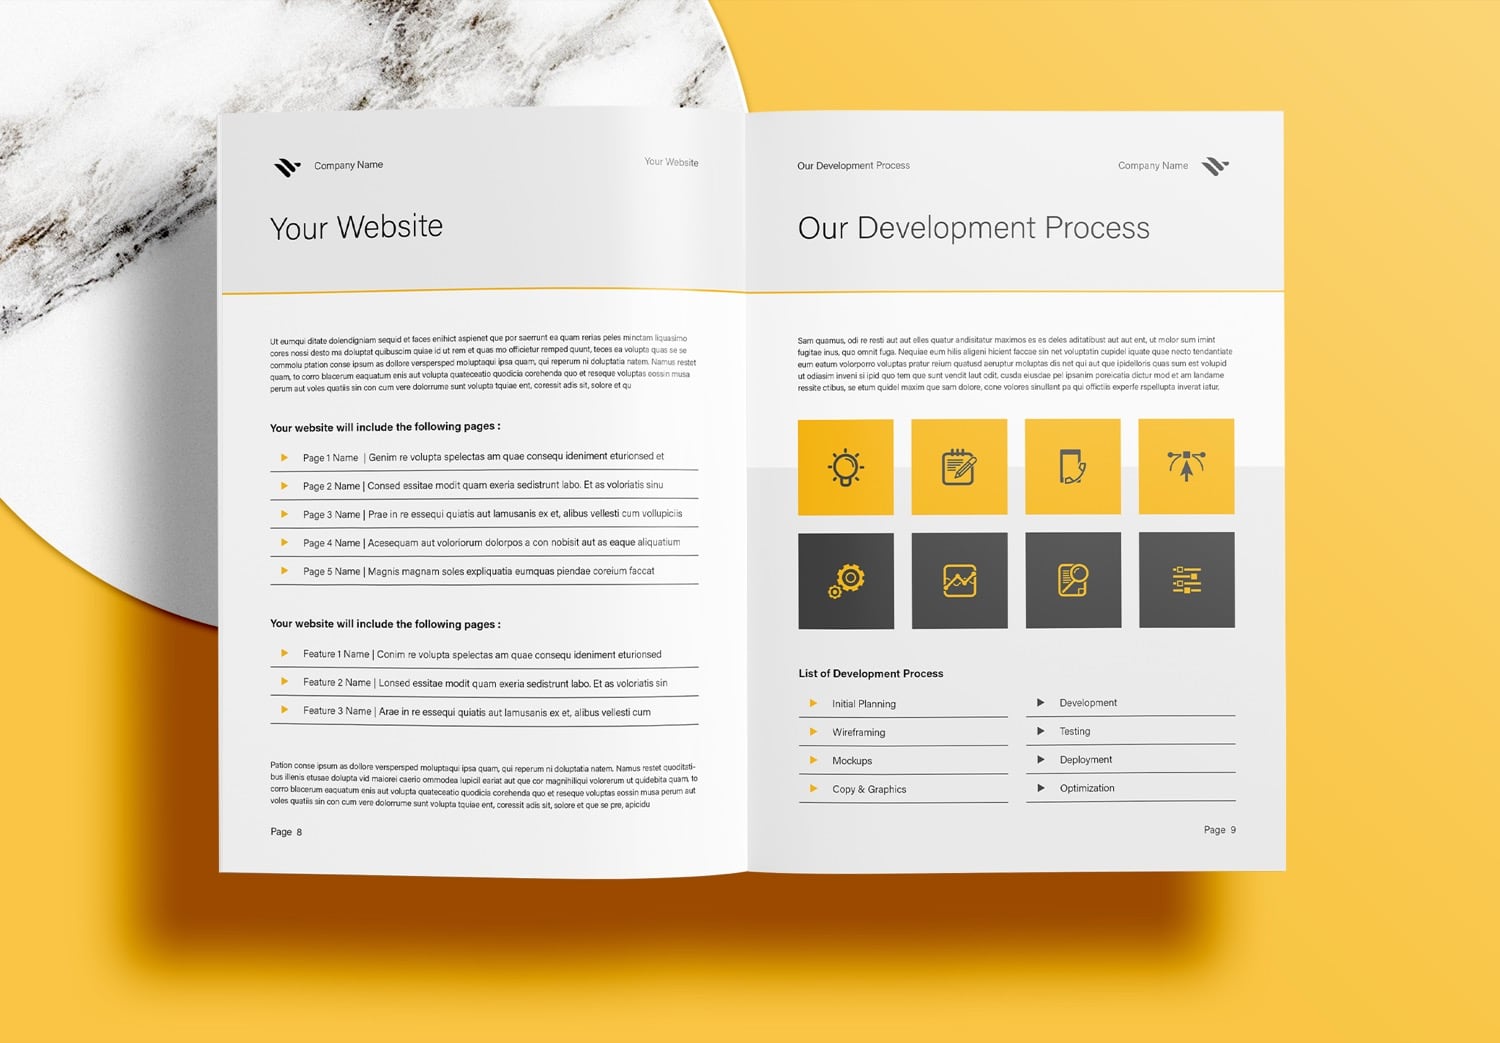 Free InDesign Business Proposal Template